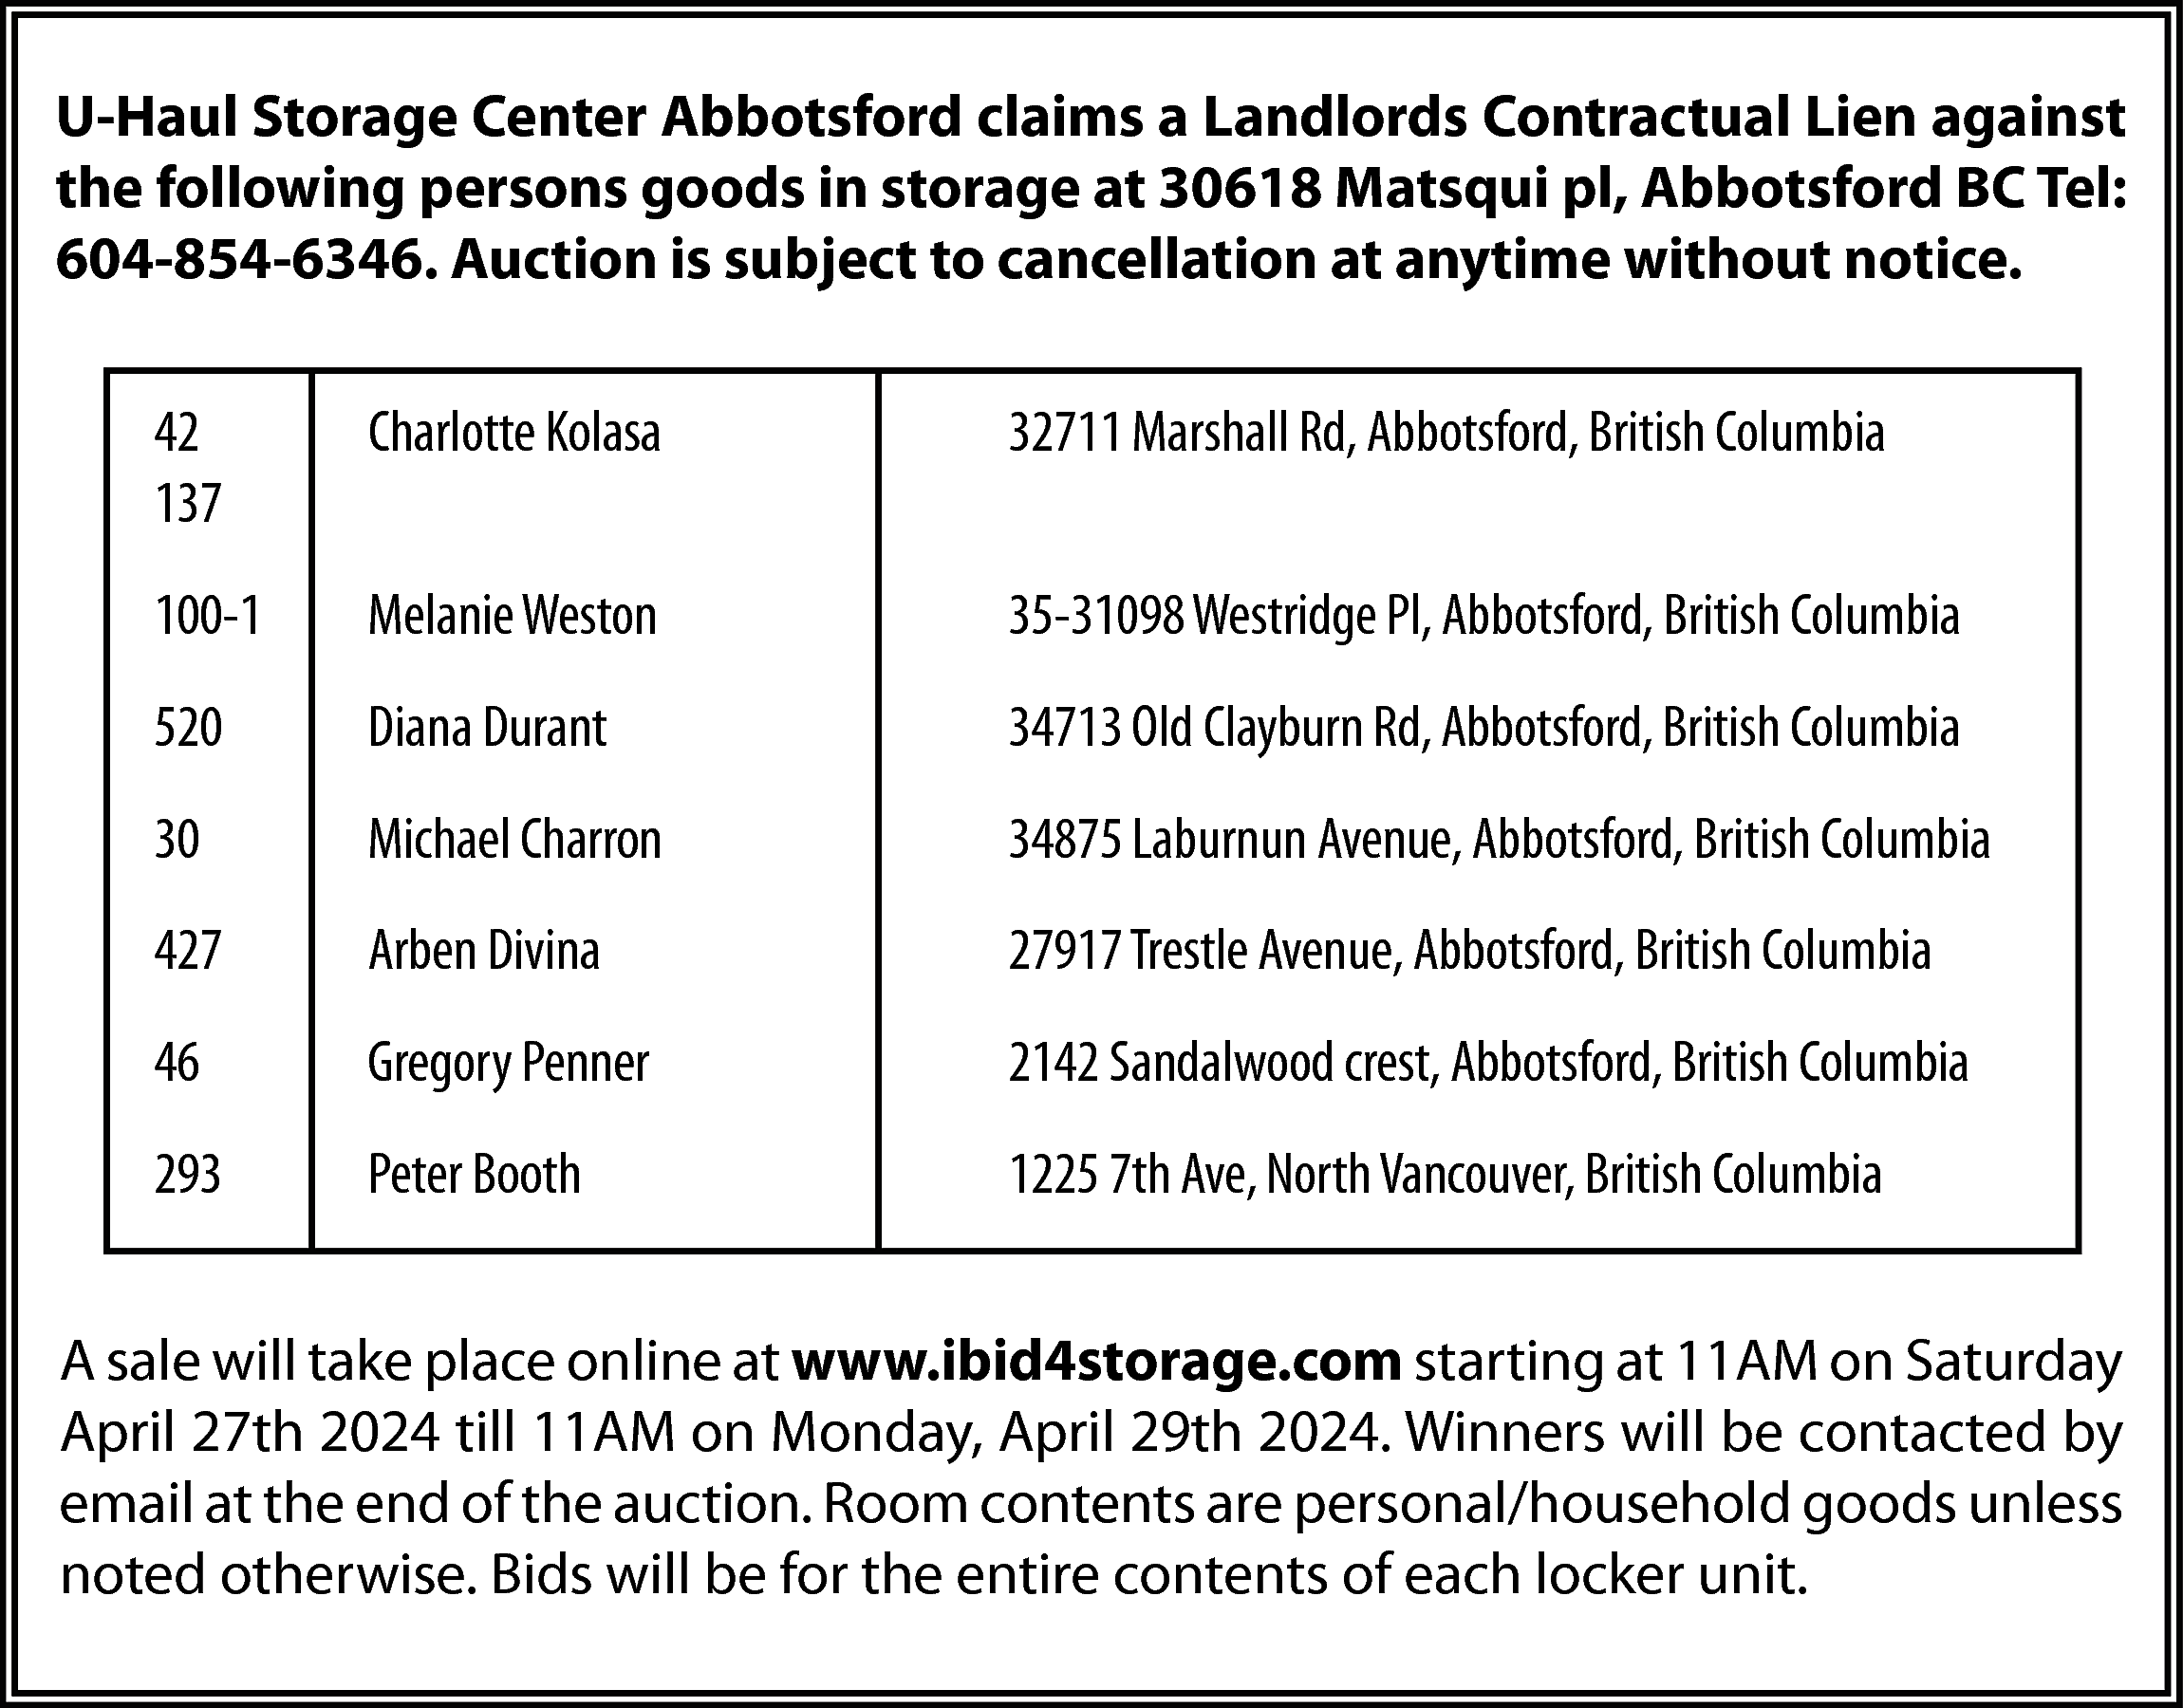 U-Haul Storage Center Abbotsford claims  U-Haul Storage Center Abbotsford claims a Landlords Contractual Lien against  the following persons goods in storage at 30618 Matsqui pl, Abbotsford BC Tel:  604-854-6346. Auction is subject to cancellation at anytime without notice.  42  137    Charlotte Kolasa    32711 Marshall Rd, Abbotsford, British Columbia    100-1    Melanie Weston    35-31098 Westridge Pl, Abbotsford, British Columbia    520    Diana Durant    34713 Old Clayburn Rd, Abbotsford, British Columbia    30    Michael Charron    34875 Laburnun Avenue, Abbotsford, British Columbia    427    Arben Divina    27917 Trestle Avenue, Abbotsford, British Columbia    46    Gregory Penner    2142 Sandalwood crest, Abbotsford, British Columbia    293    Peter Booth    1225 7th Ave, North Vancouver, British Columbia    A sale will take place online at www.ibid4storage.com starting at 11AM on Saturday  April 27th 2024 till 11AM on Monday, April 29th 2024. Winners will be contacted by  email at the end of the auction. Room contents are personal/household goods unless  noted otherwise. Bids will be for the entire contents of each locker unit.    